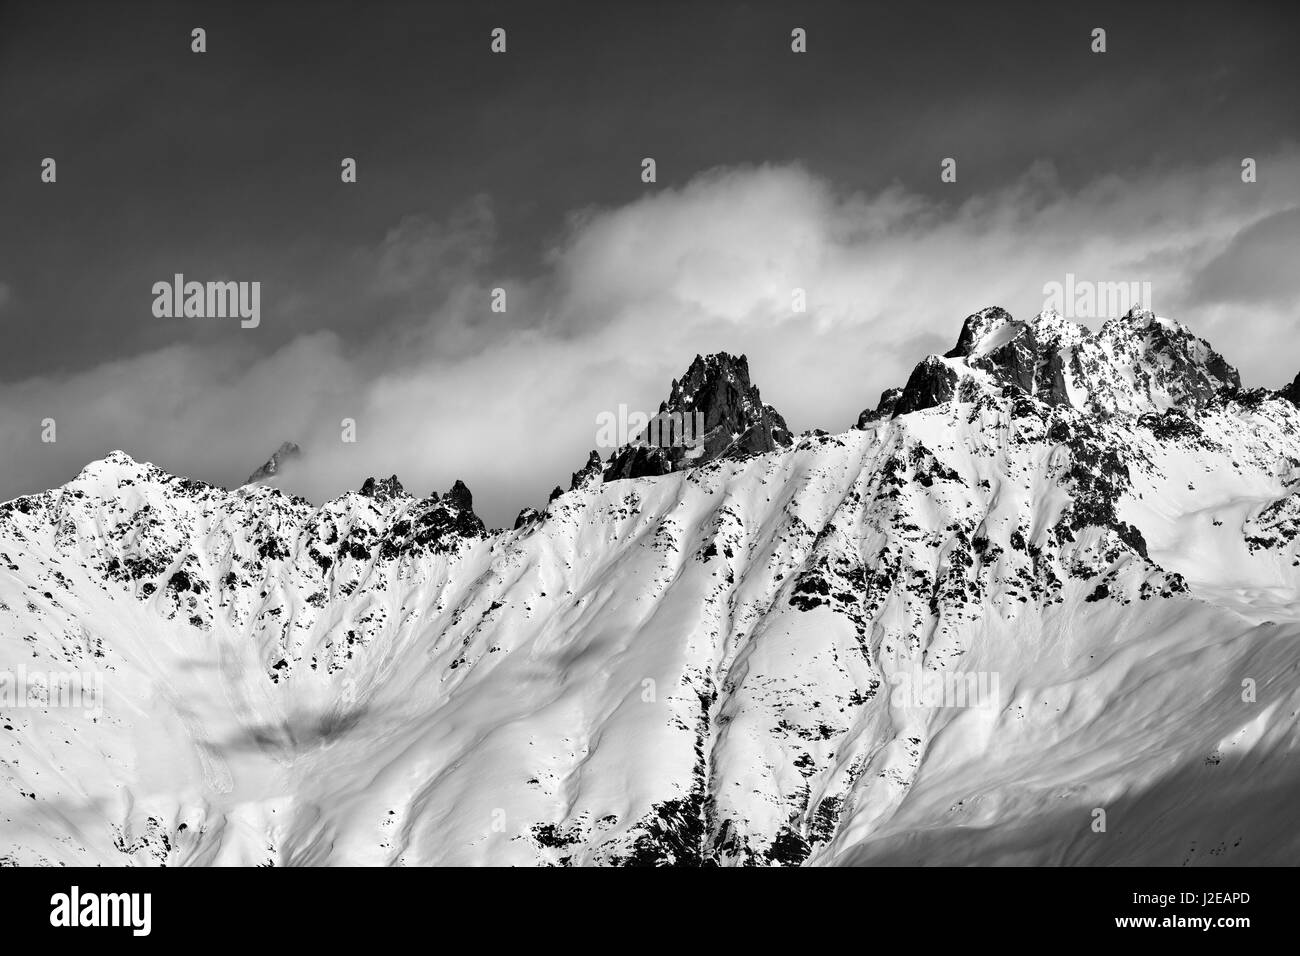 Black and white snow avalanches mountainside in clouds. View from ski lift on Hatsvali, Svaneti region of Georgia. Caucasus Mountains. Stock Photo